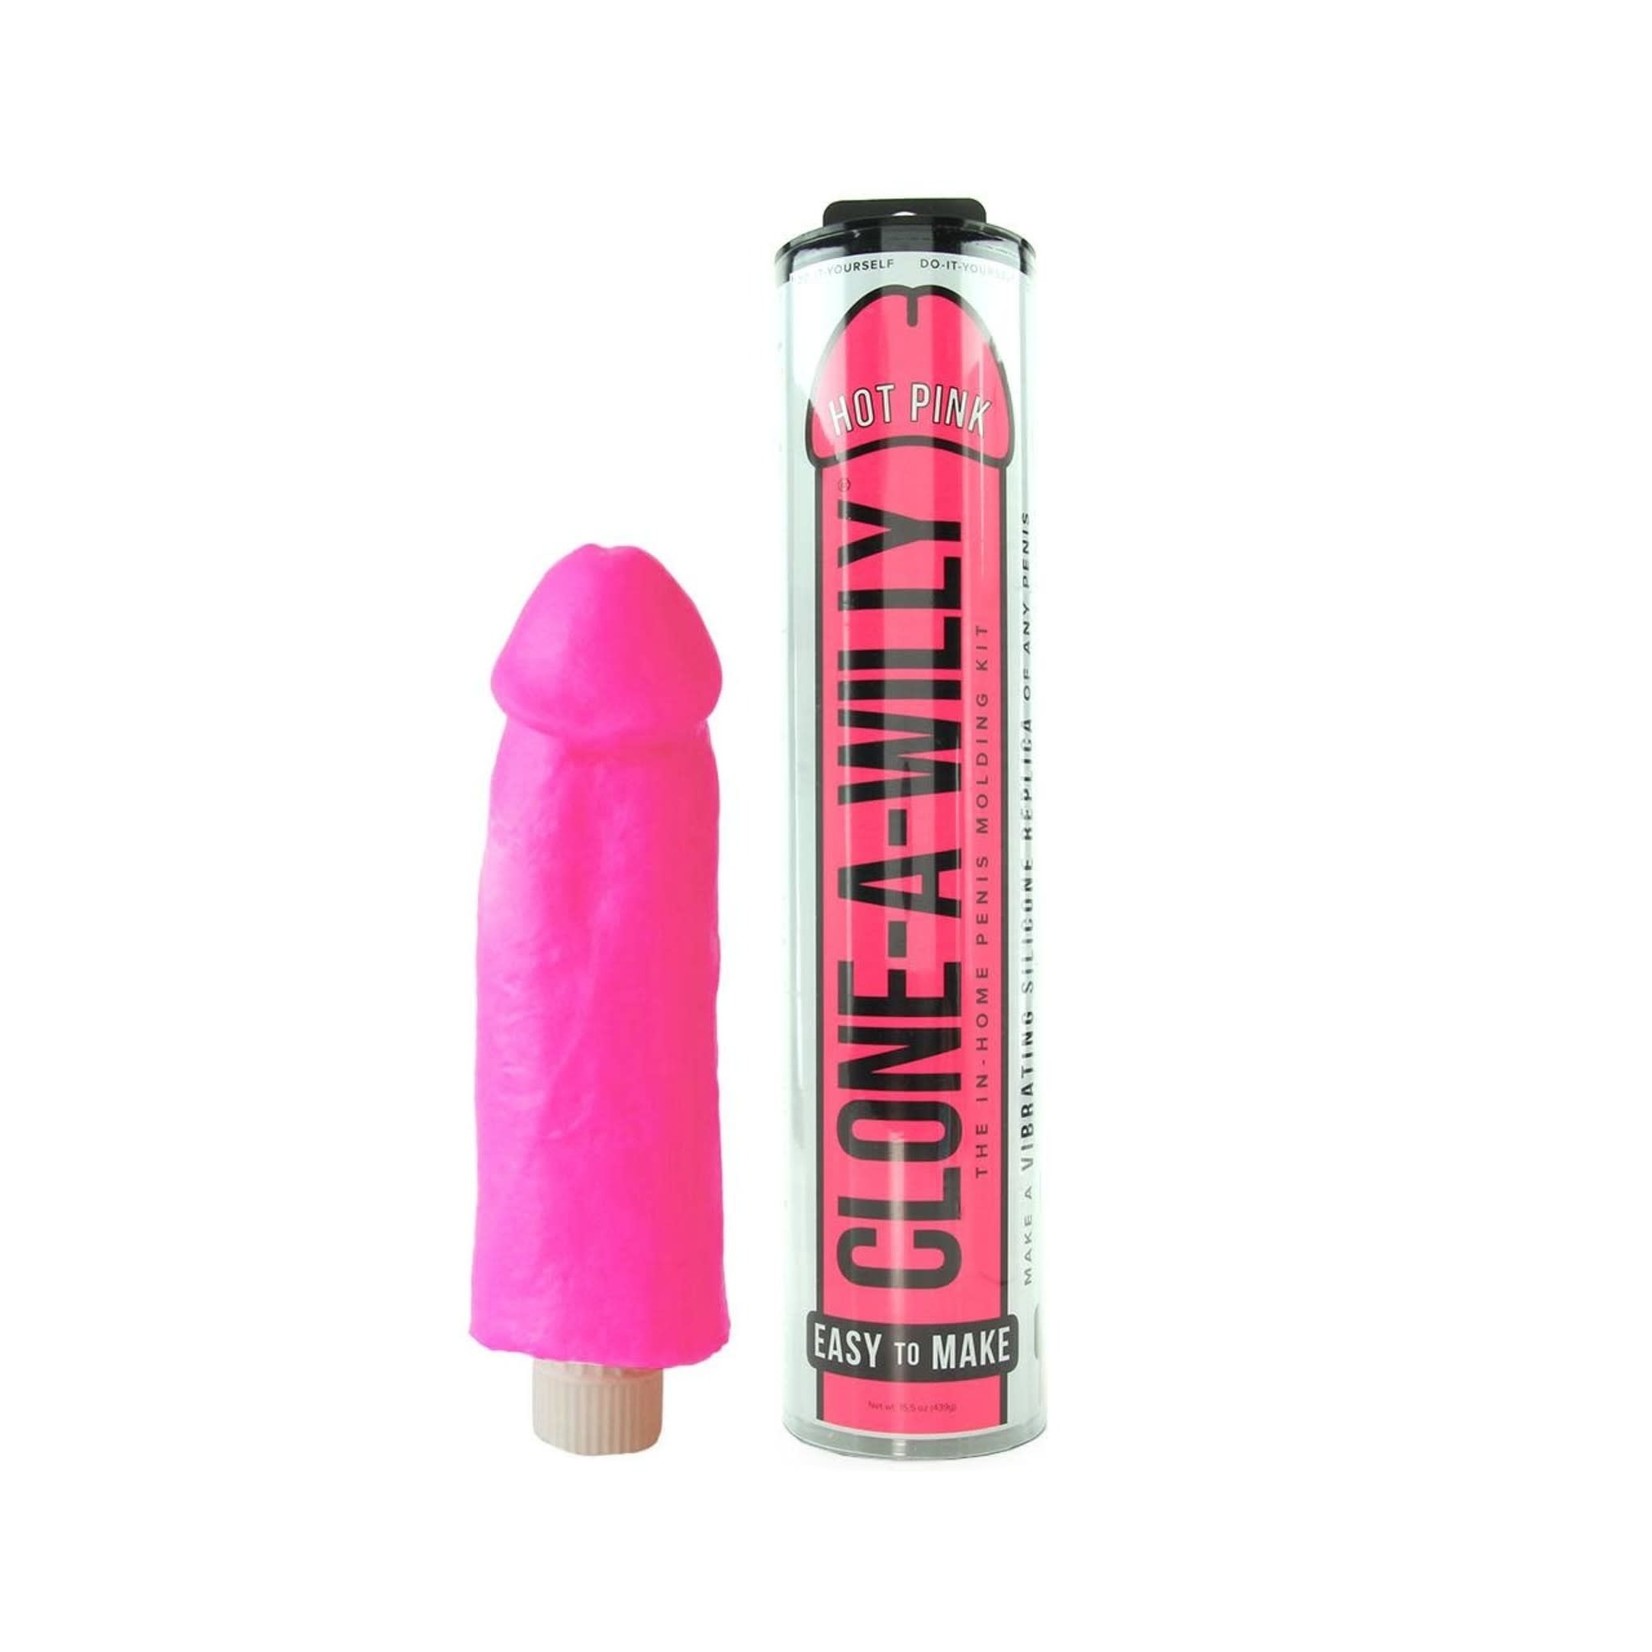 CLONE A WILLY (EMPIRE LABS) CLONE-A-WILLY VIBE KIT GLOW IN THE DARK - HOT PINK